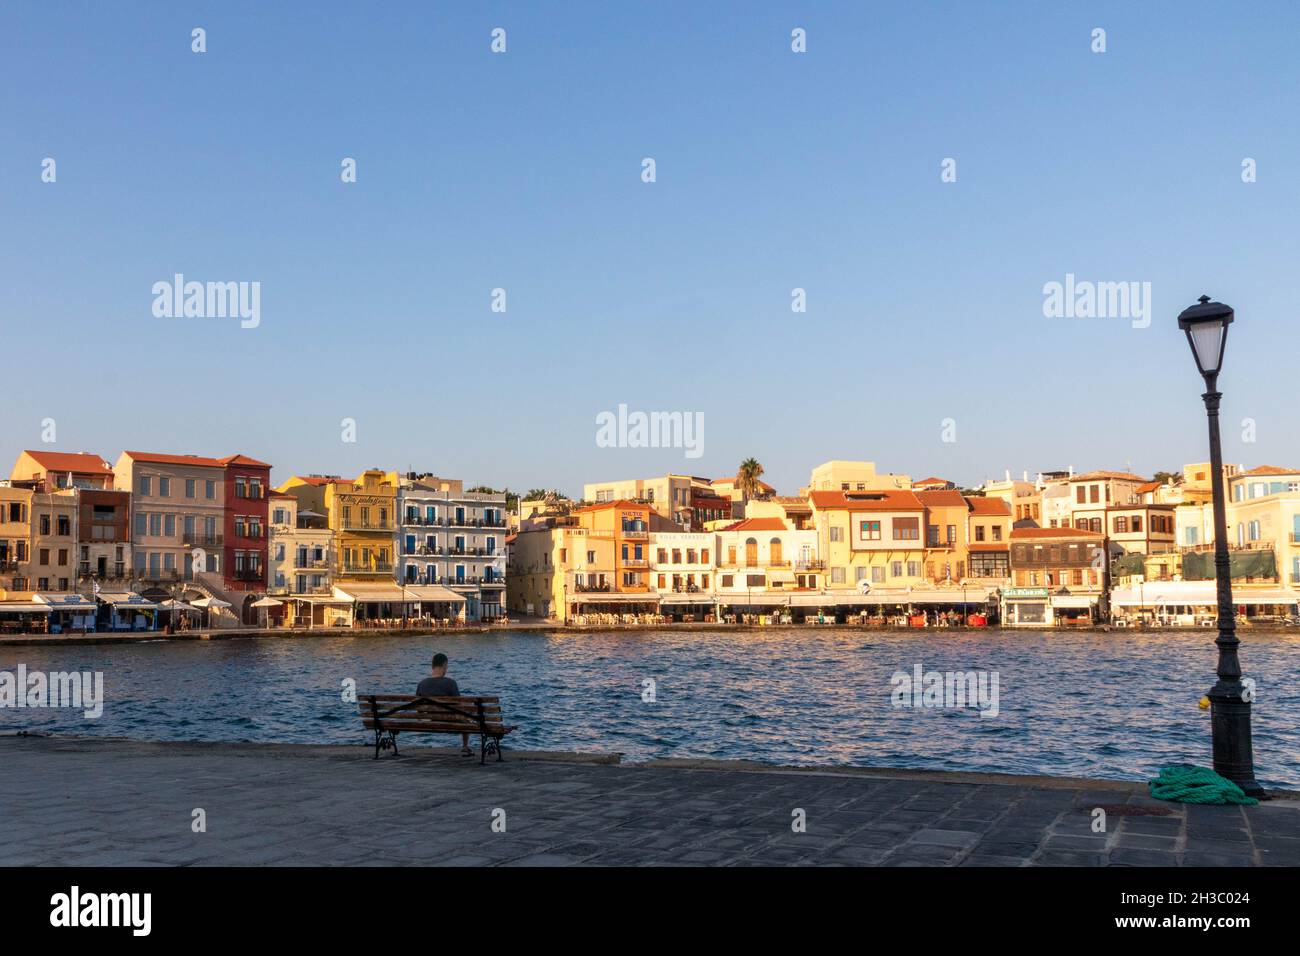 Man sat on a bench in the late afternoon, Old Venetian Harbour, Chania, Crete, Greece Stock Photo